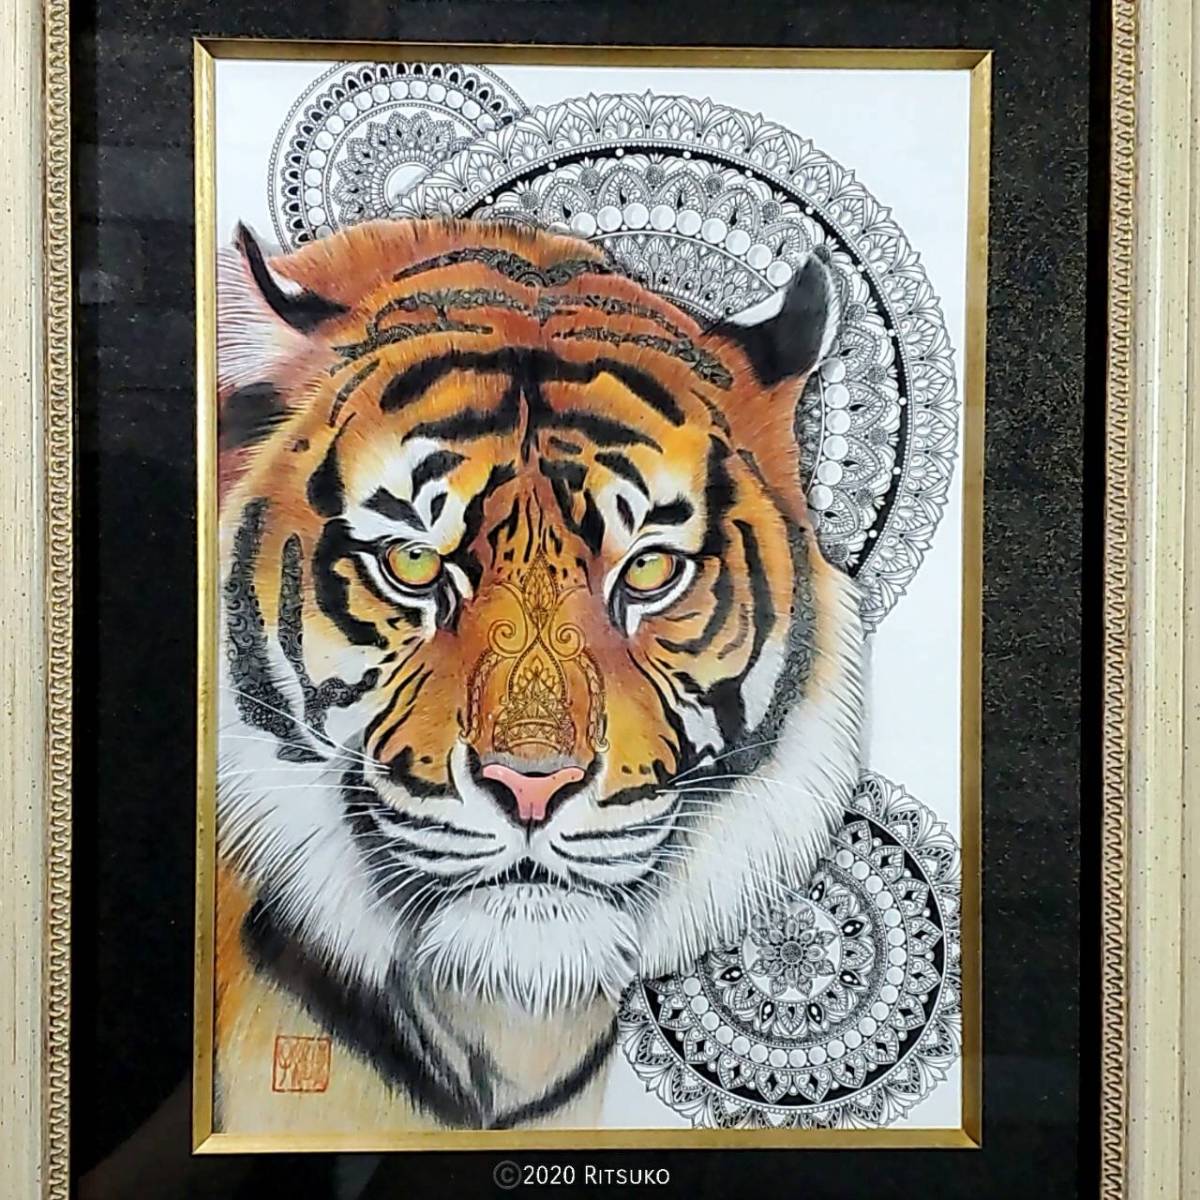 Original one-of-a-kind colored pencil drawing ballpoint pen drawing Japanese artist tiger tiger painting drawing art interior good luck tiger drawing zodiac sign, artwork, painting, pencil drawing, charcoal drawing